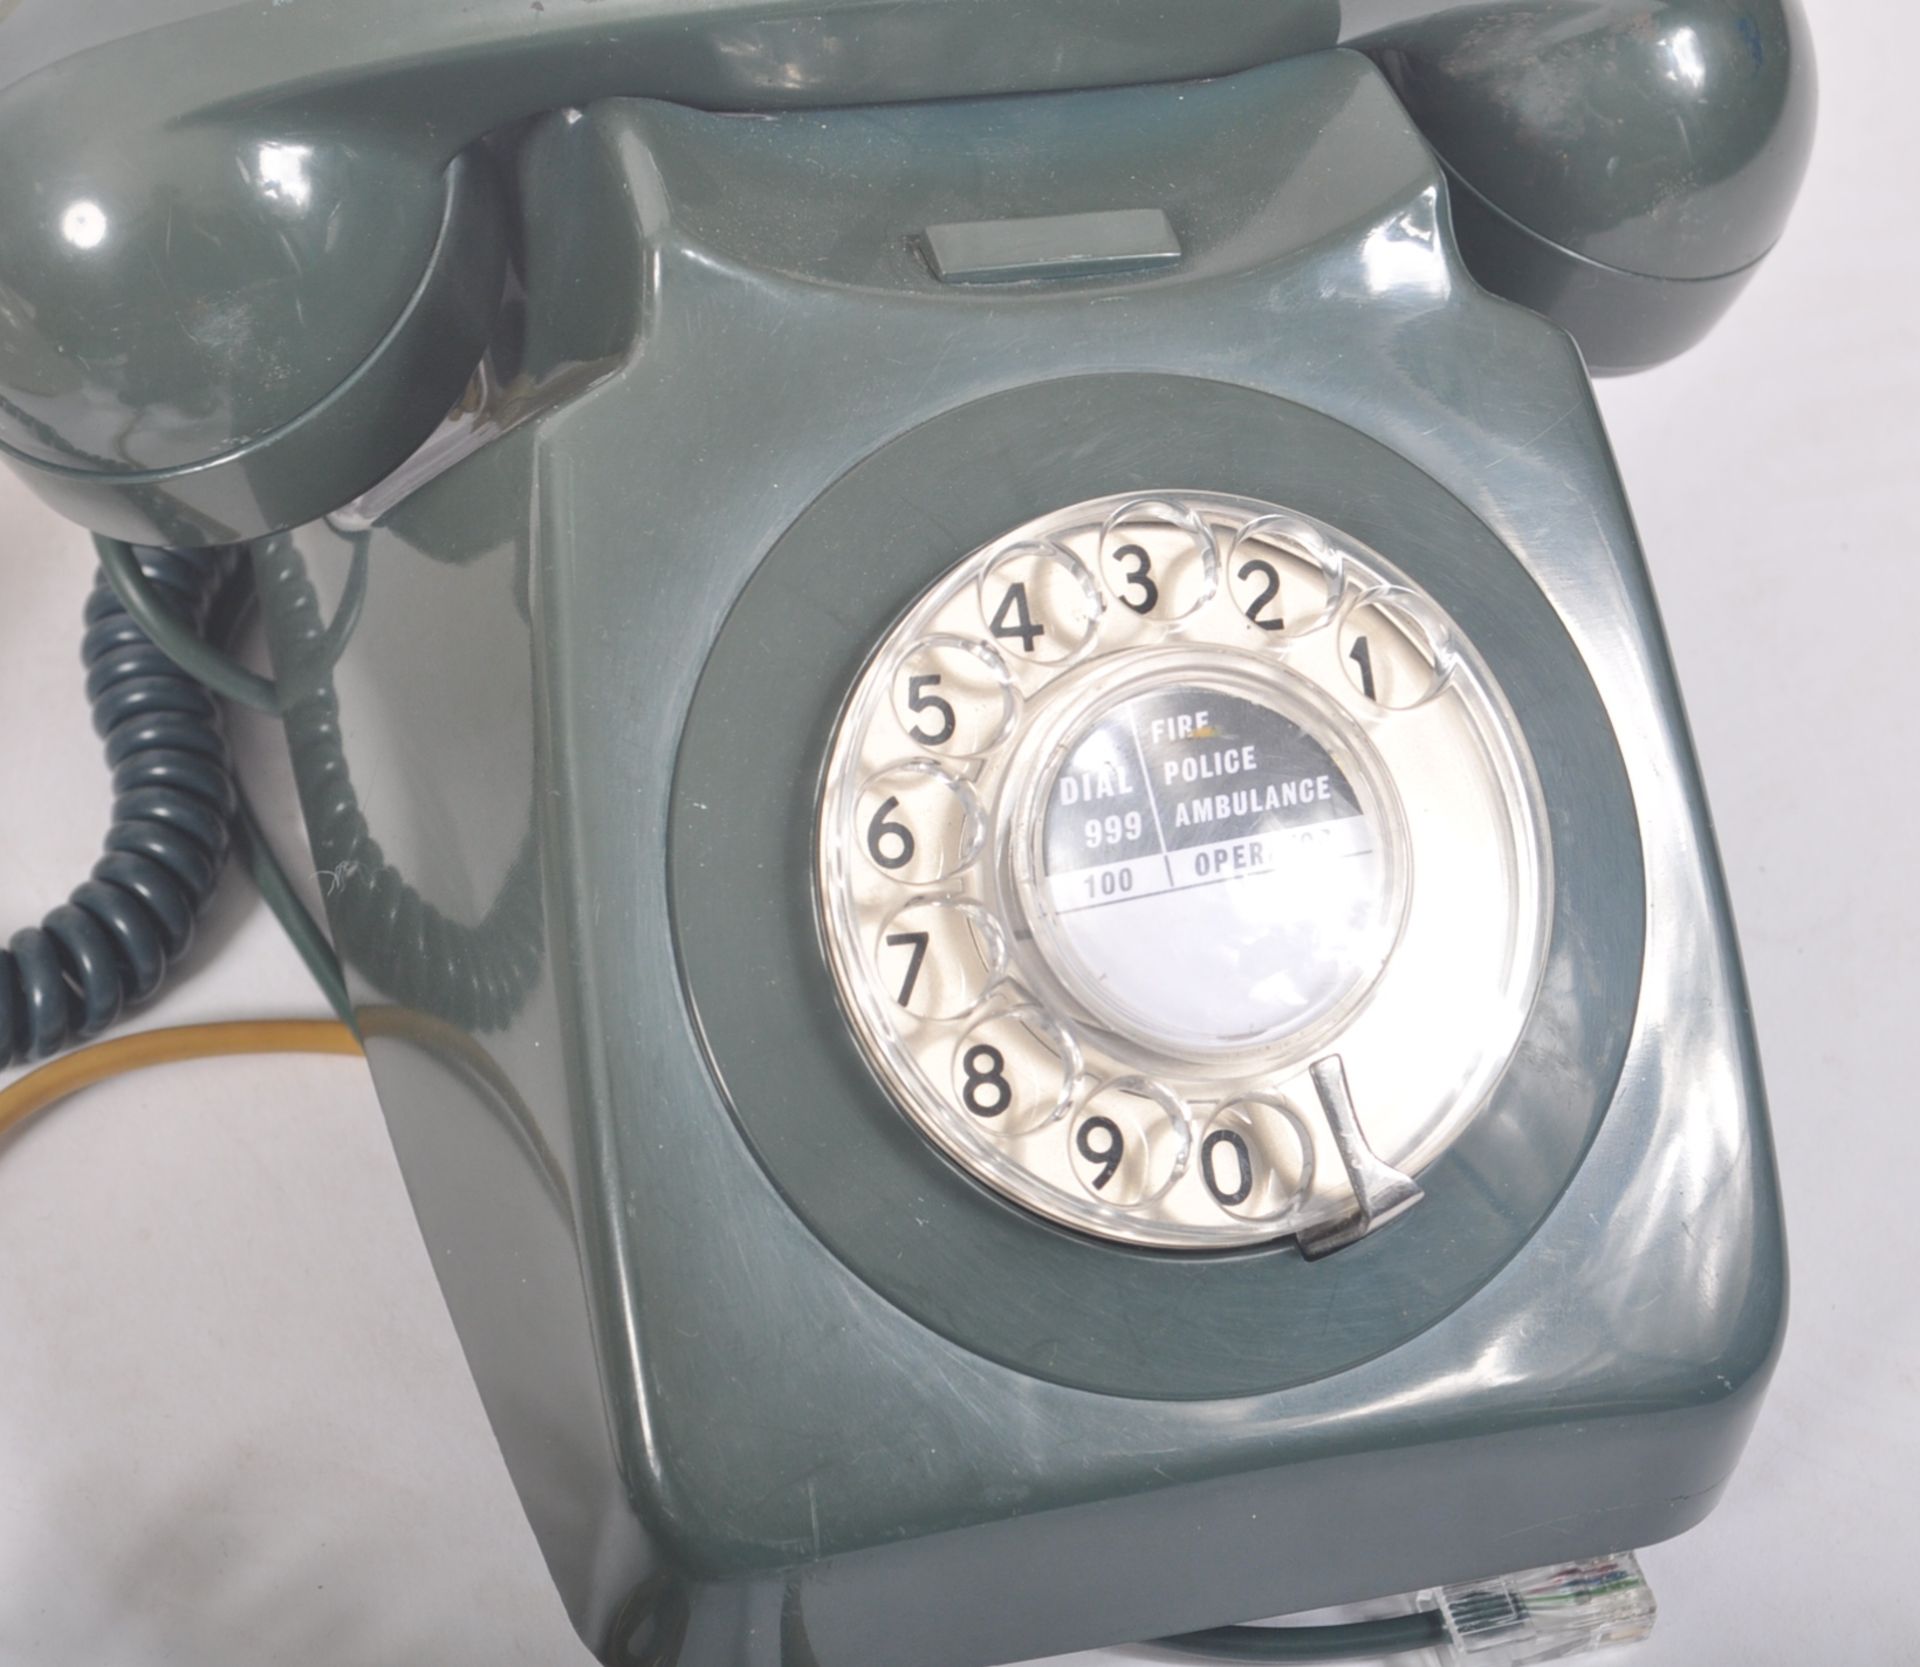 COLLECTION OF SEVEN VINTAGE 1970S ROTARY DIAL PO TELEPHONES - Image 5 of 9